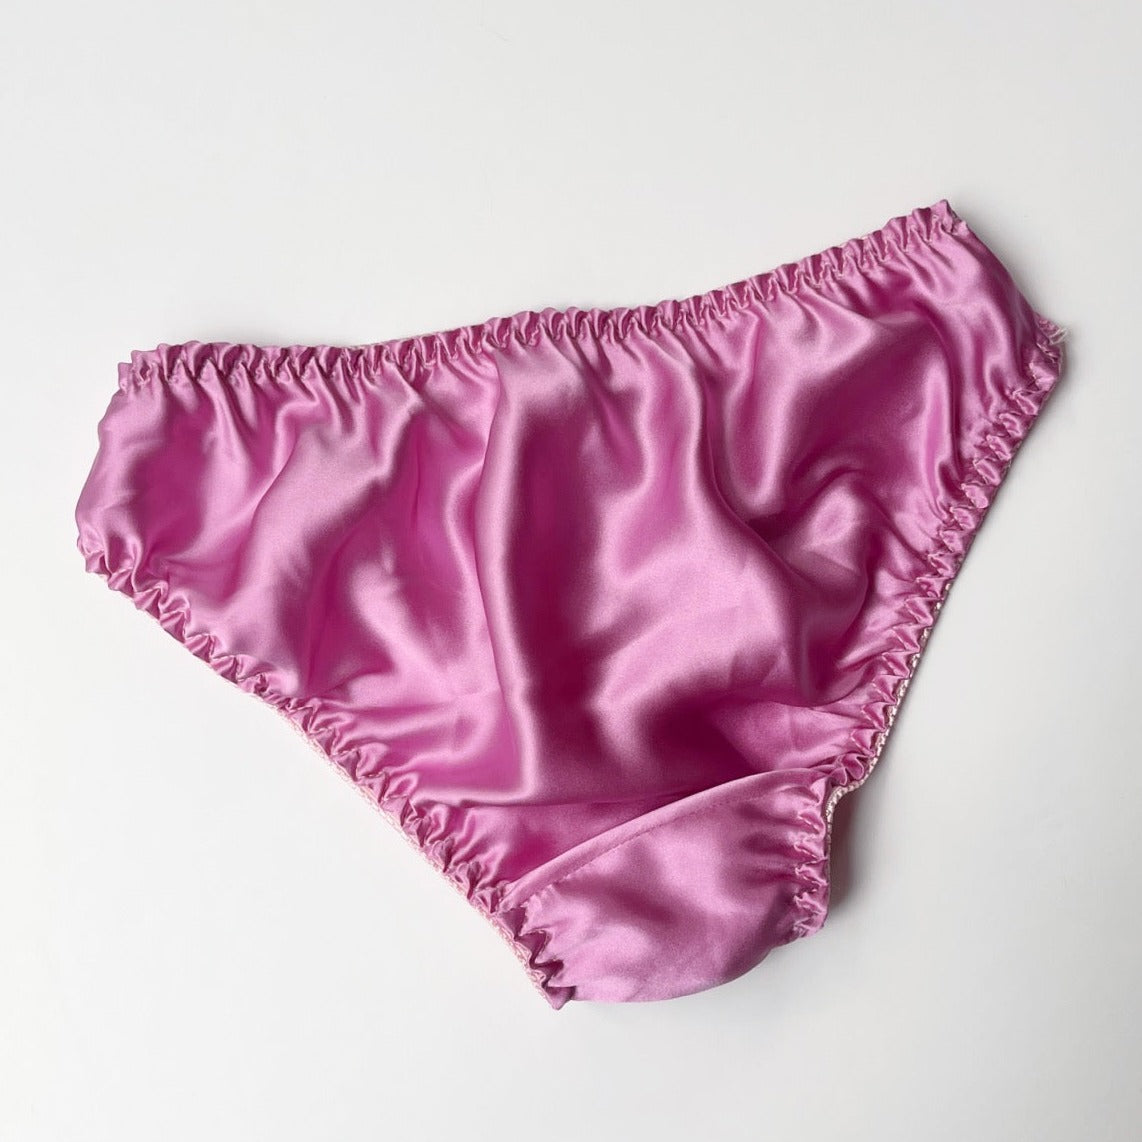 satin pure silk underwear for women, silk panties, made in Canada silk lingerie and apparel